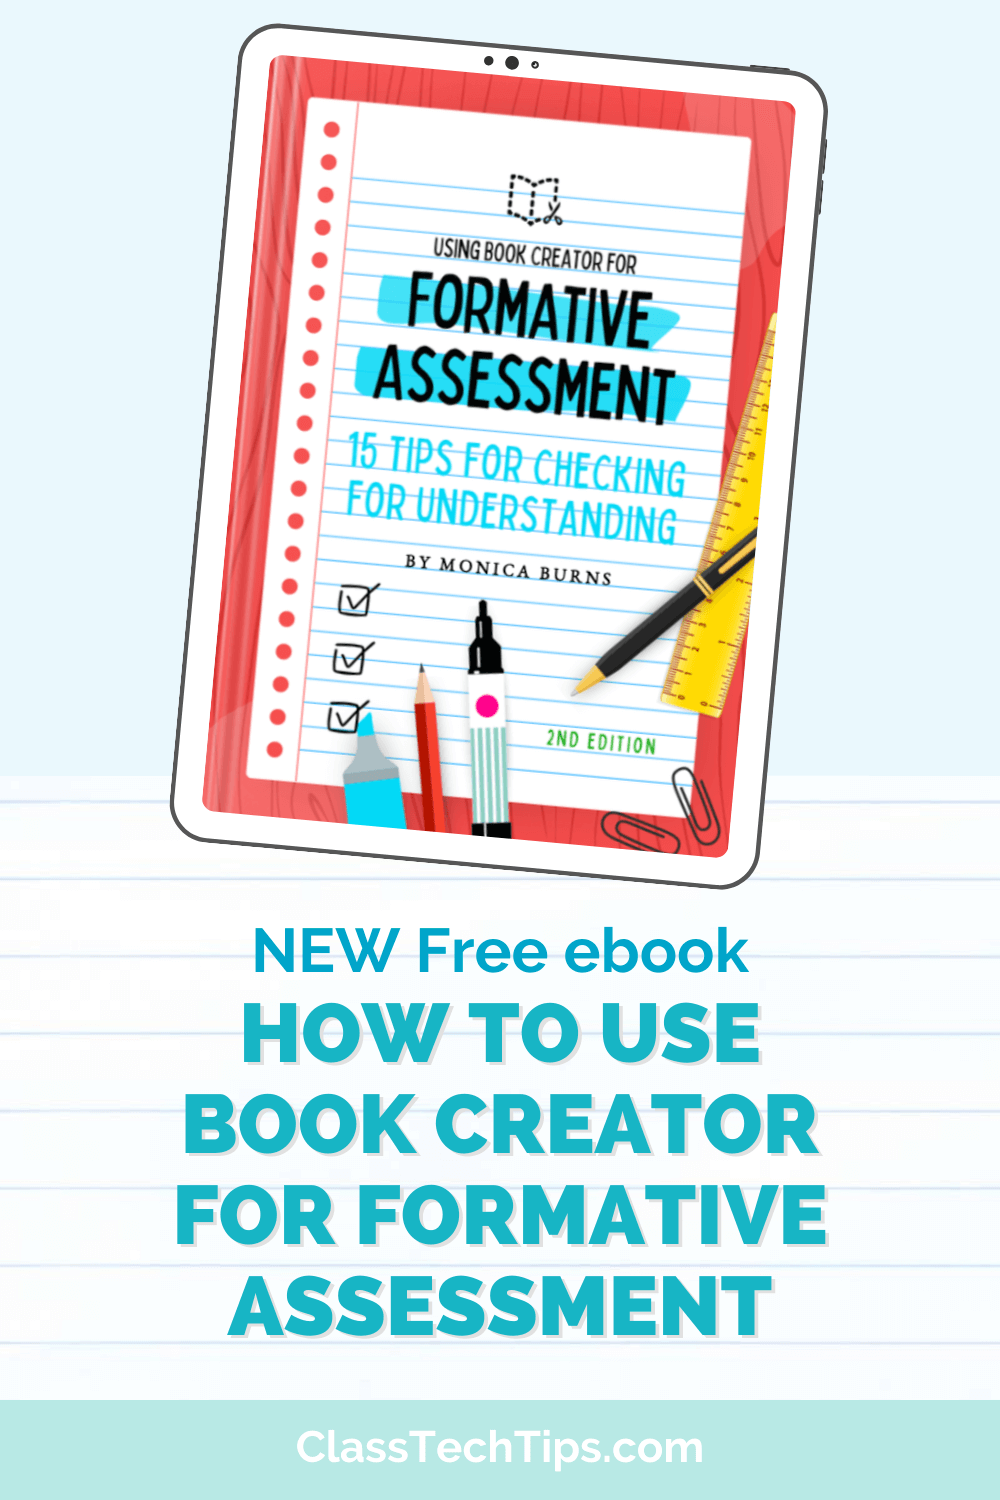 A tablet screen displaying an ebook cover with school supplies, featuring "Using Book Creator for Formative Assessment" and the subtitle "15 Tips for Checking for Understanding" by Monica Burns, promoted as a new free ebook on ClassTechTips.com.